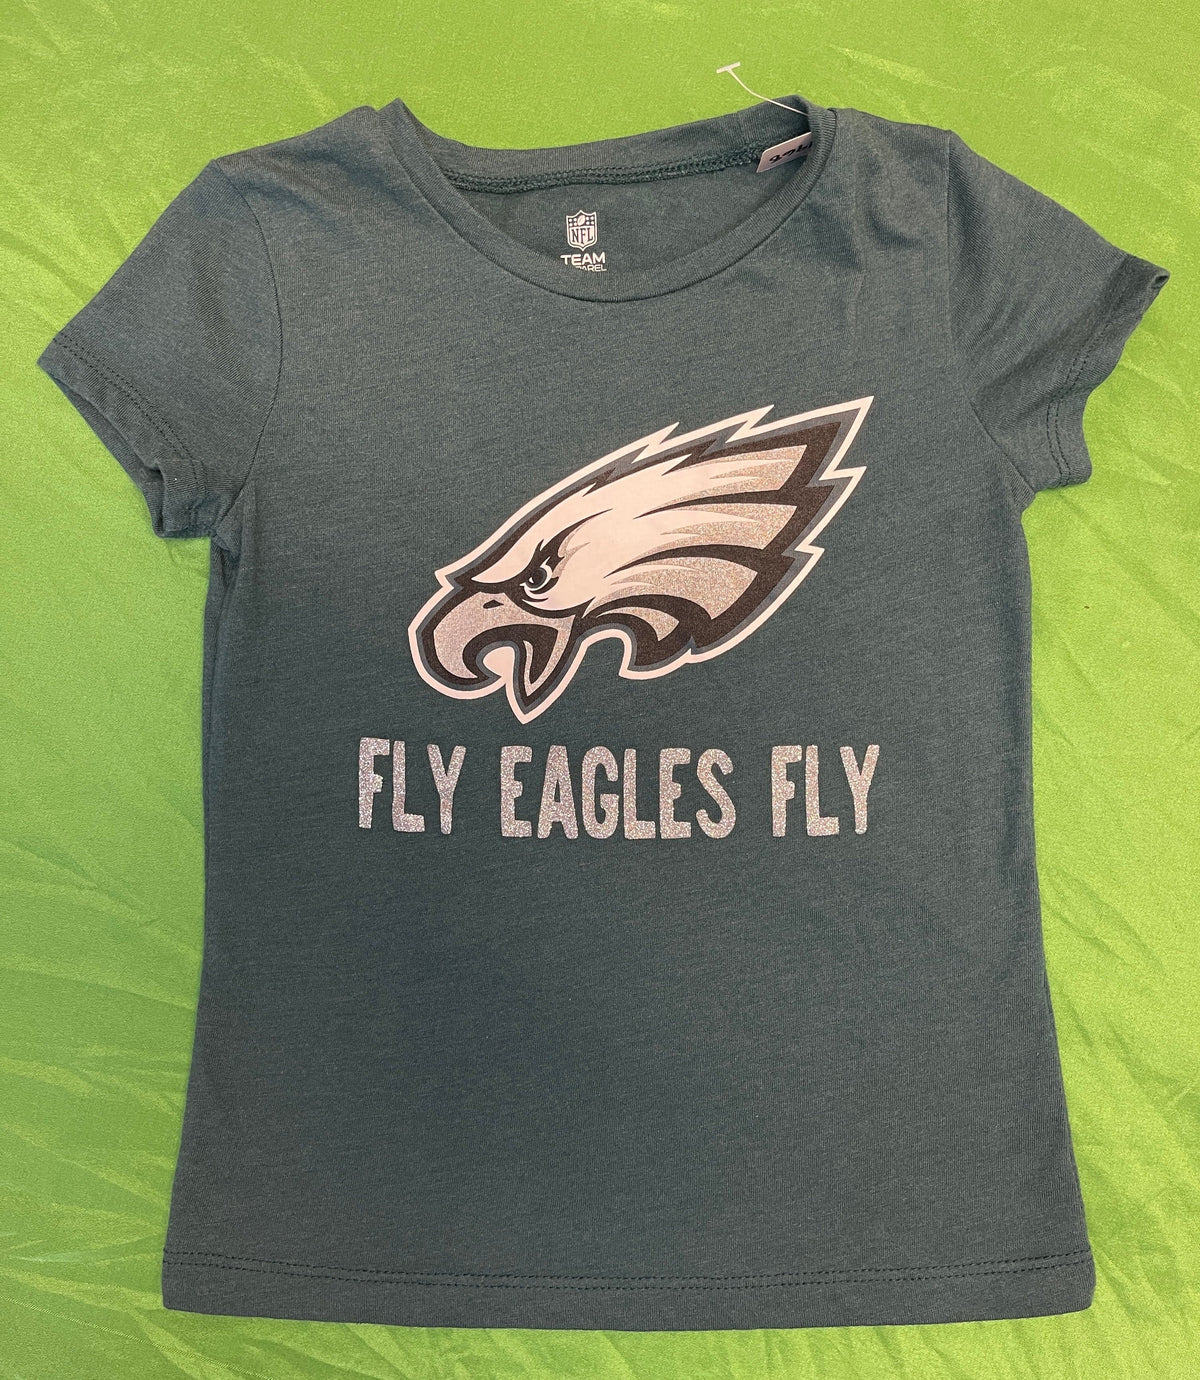 NFL Philadelphia Eagles Sparkly Girls' T-Shirt Toddler Youth X-Small 5